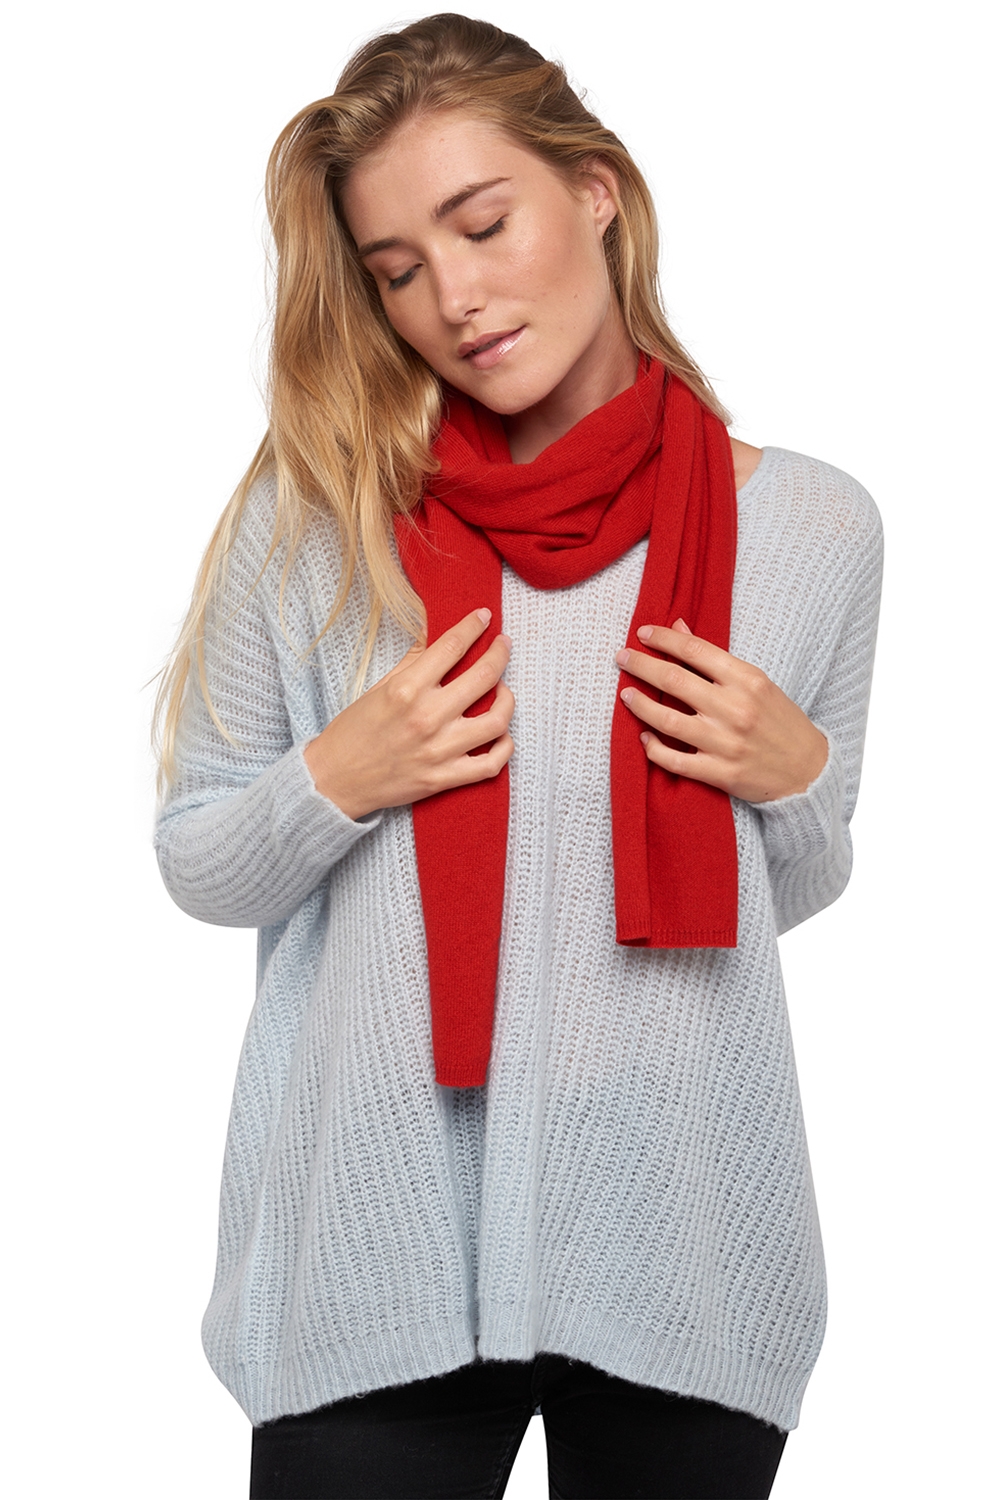 Cashmere ladies scarves mufflers ozone rouge 160 x 30 cm